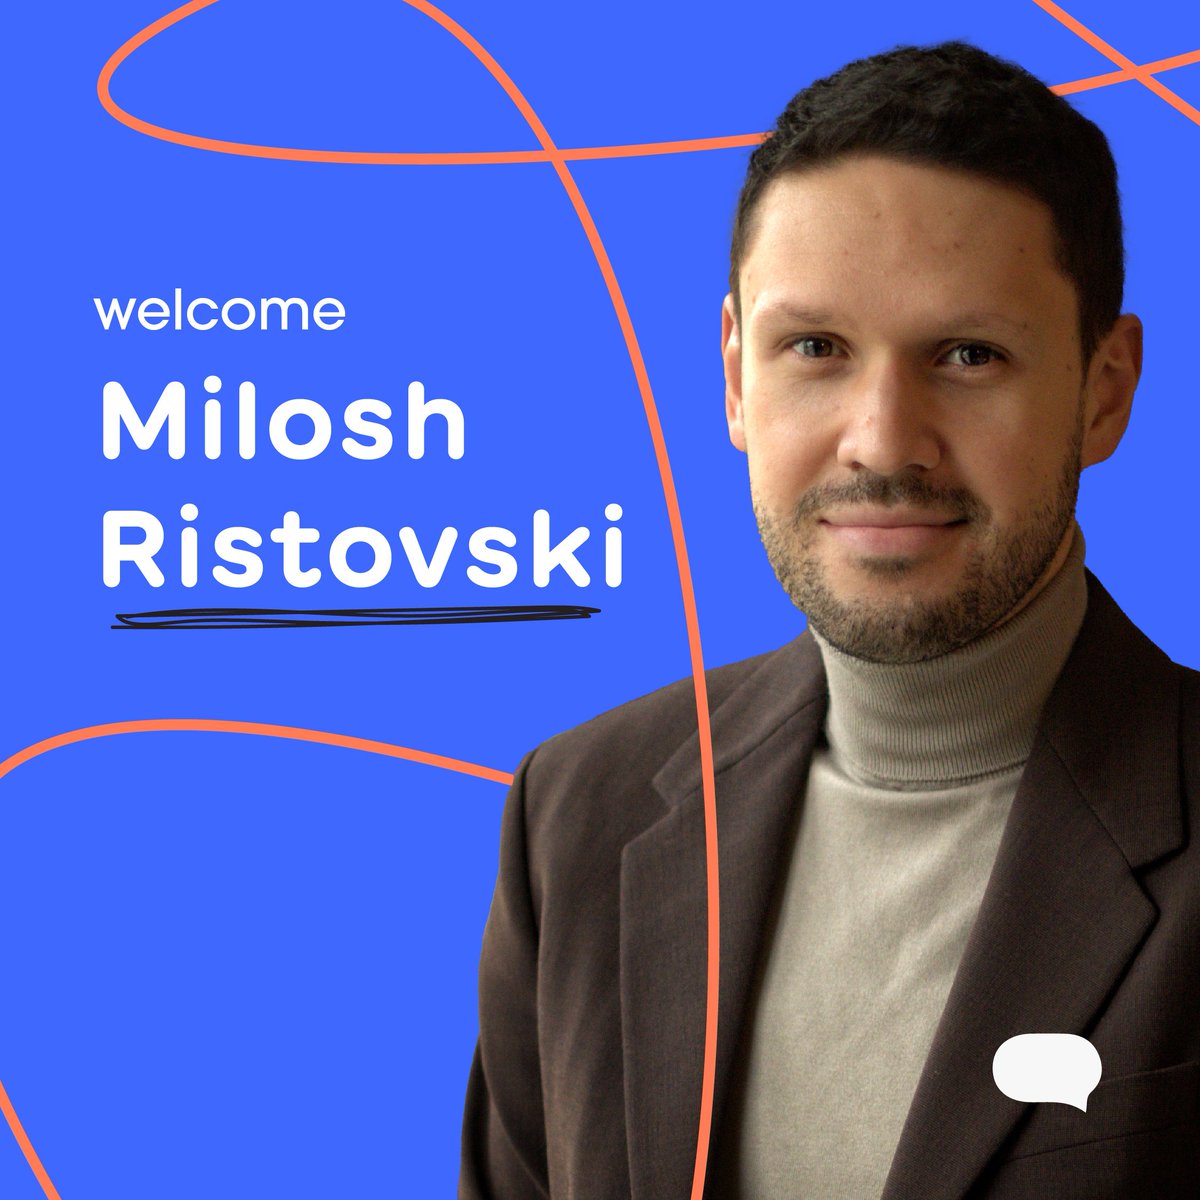 I am overjoyed to welcome Milosh Ristovski as Secretary General of the European @Youth_Forum. His extensive experience in European civil society and youth policy will reinforce our fight #ForYouthRights Looking forward to our work together!